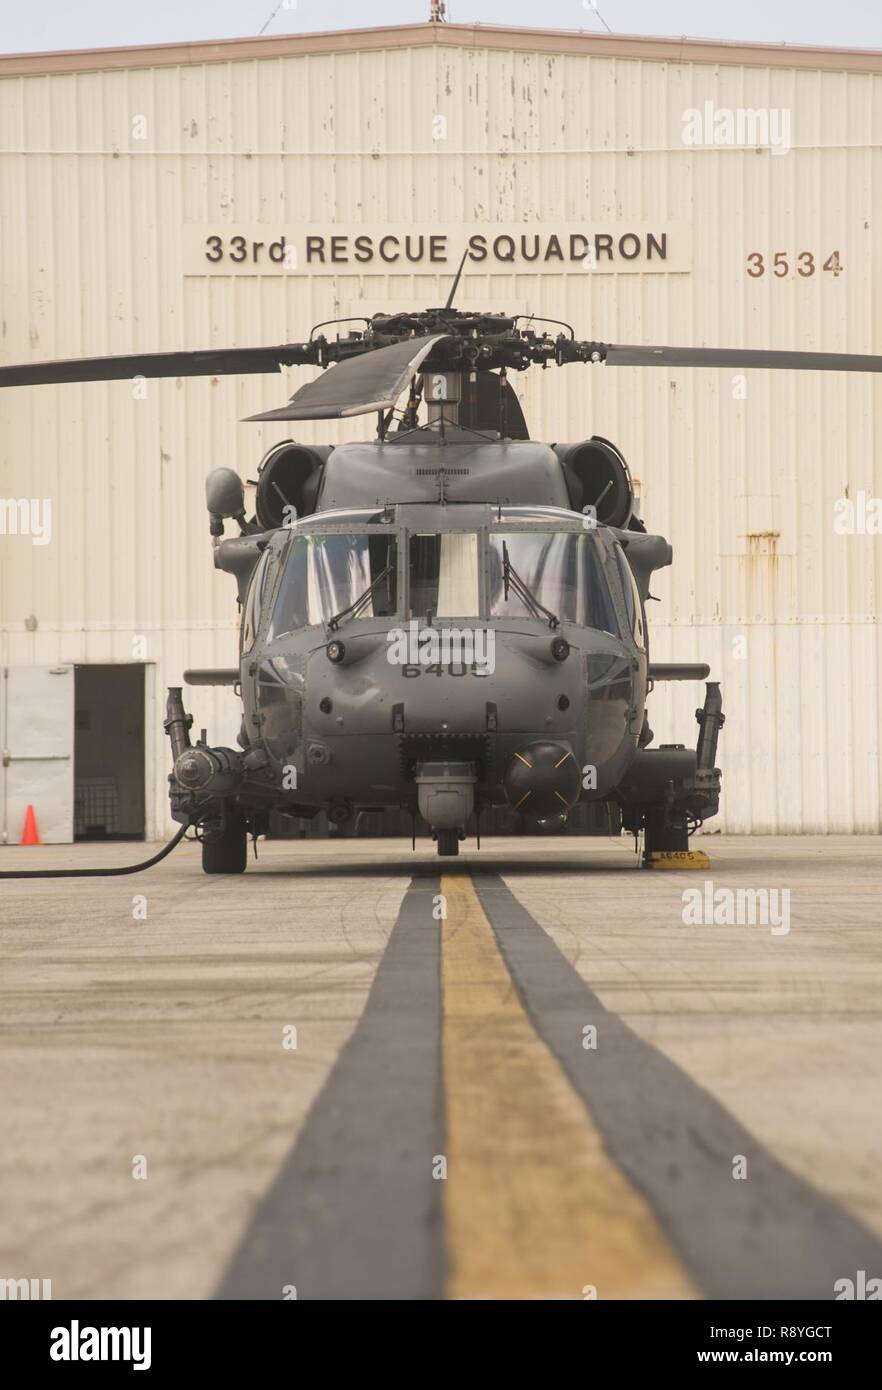 A HH-60G Pave Hawk sits on display outside the 33rd Rescue Squadron March 15, 2017, at Kadena Air Base, Japan. As part of a week of joint-service professional military education, the Airmen of Kadena demonstrated what the Air Force brings to the fight. Stock Photo